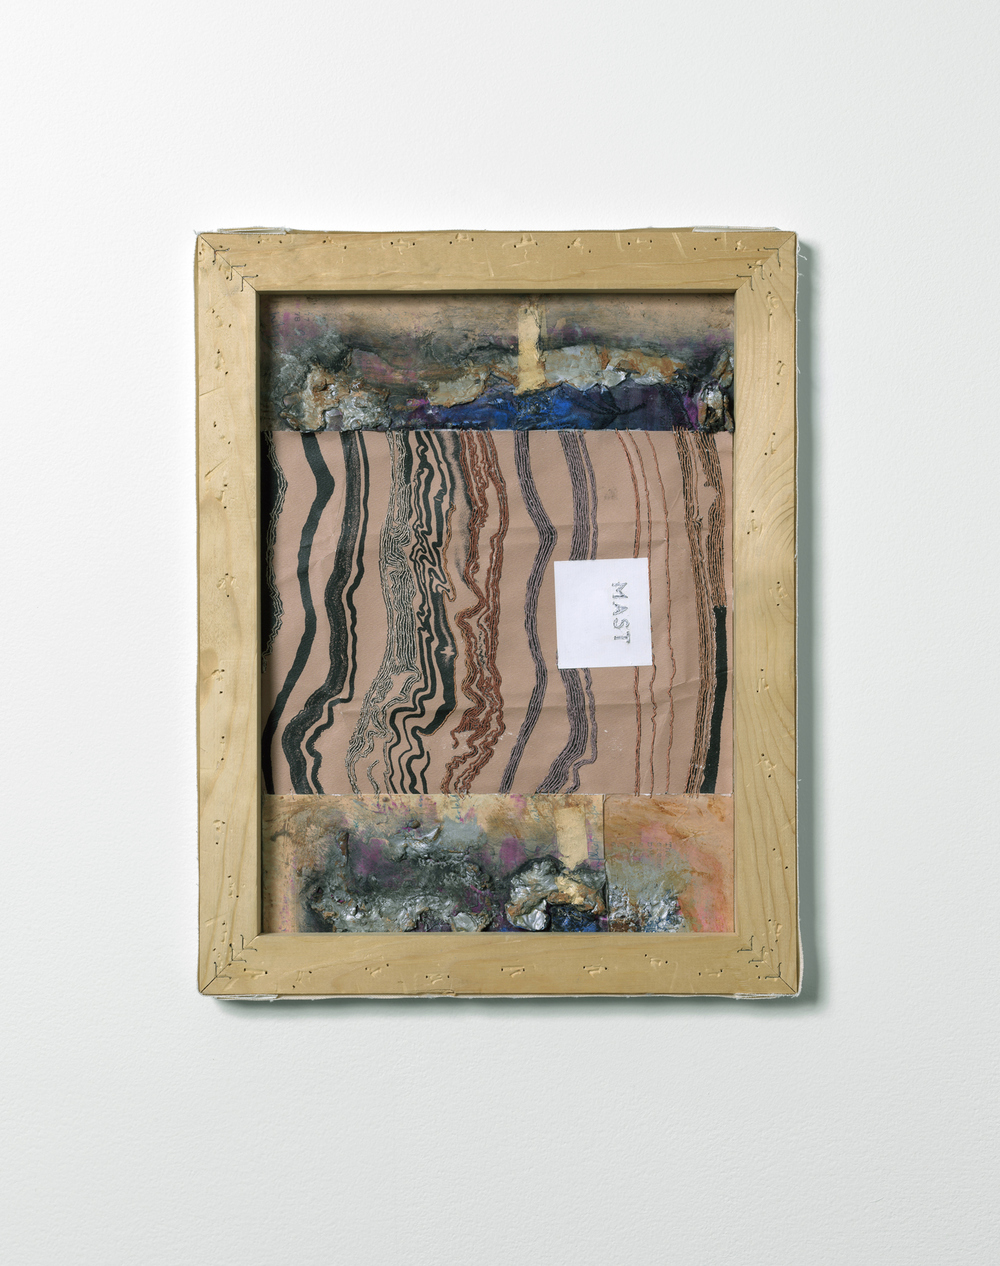 Nicola Ginzel  Selected Flatwork Wrapper embroidered with thread by hand, backed with fabric, collaged with oil pastel, printing ink, dress parts, inside stretcher